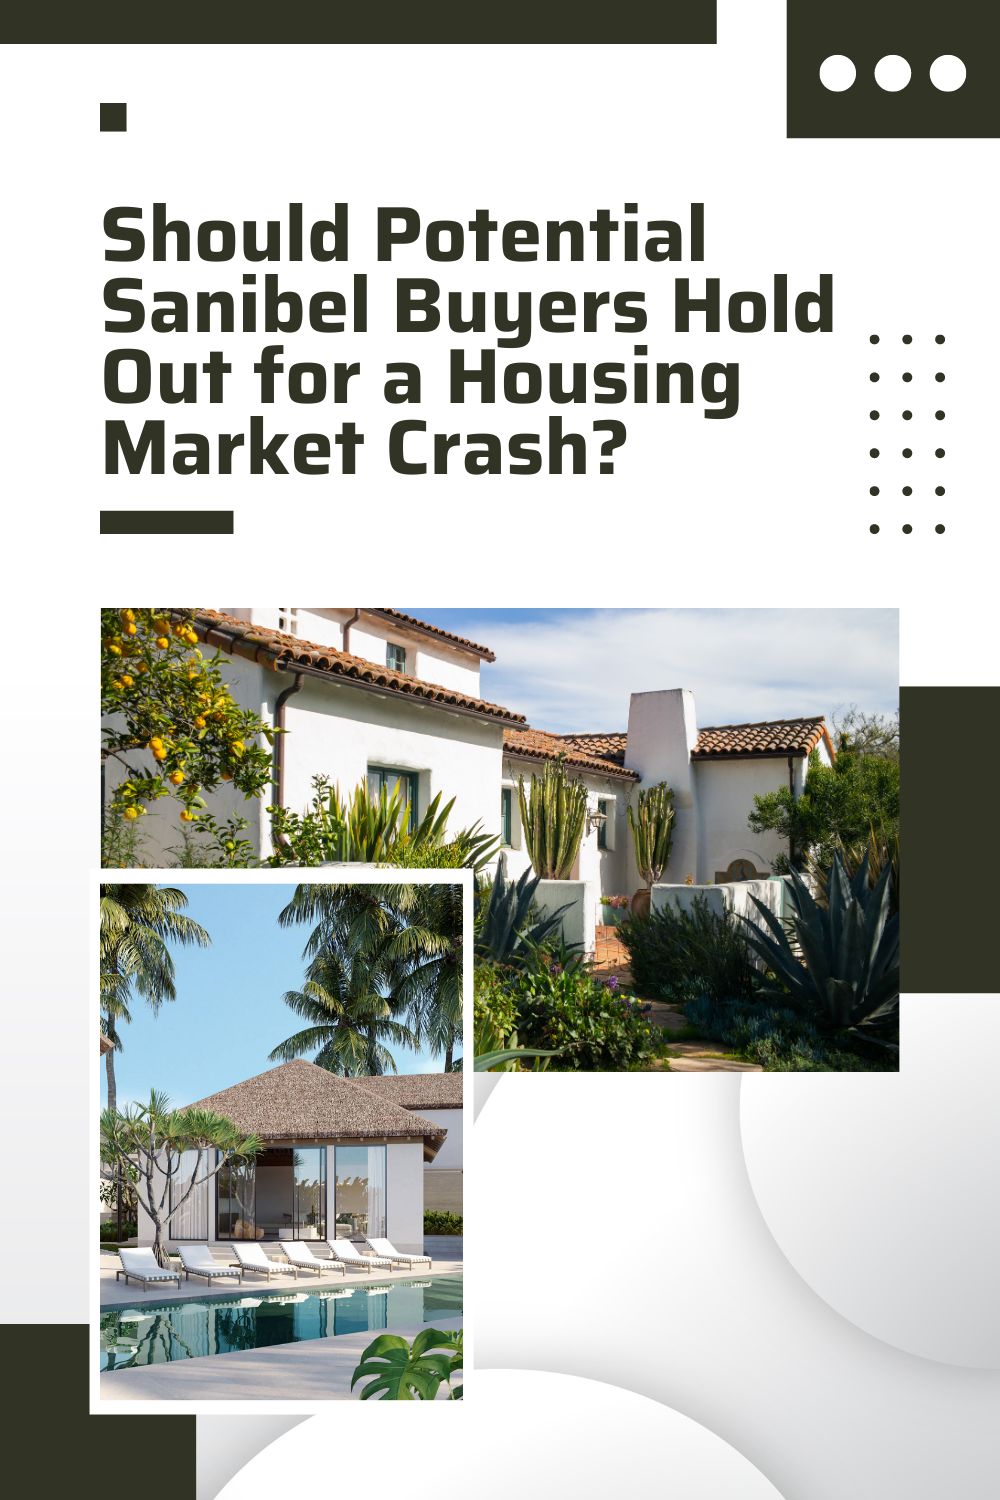 Should Potential Sanibel Buyers Hold Out for a Housing Market Crash?